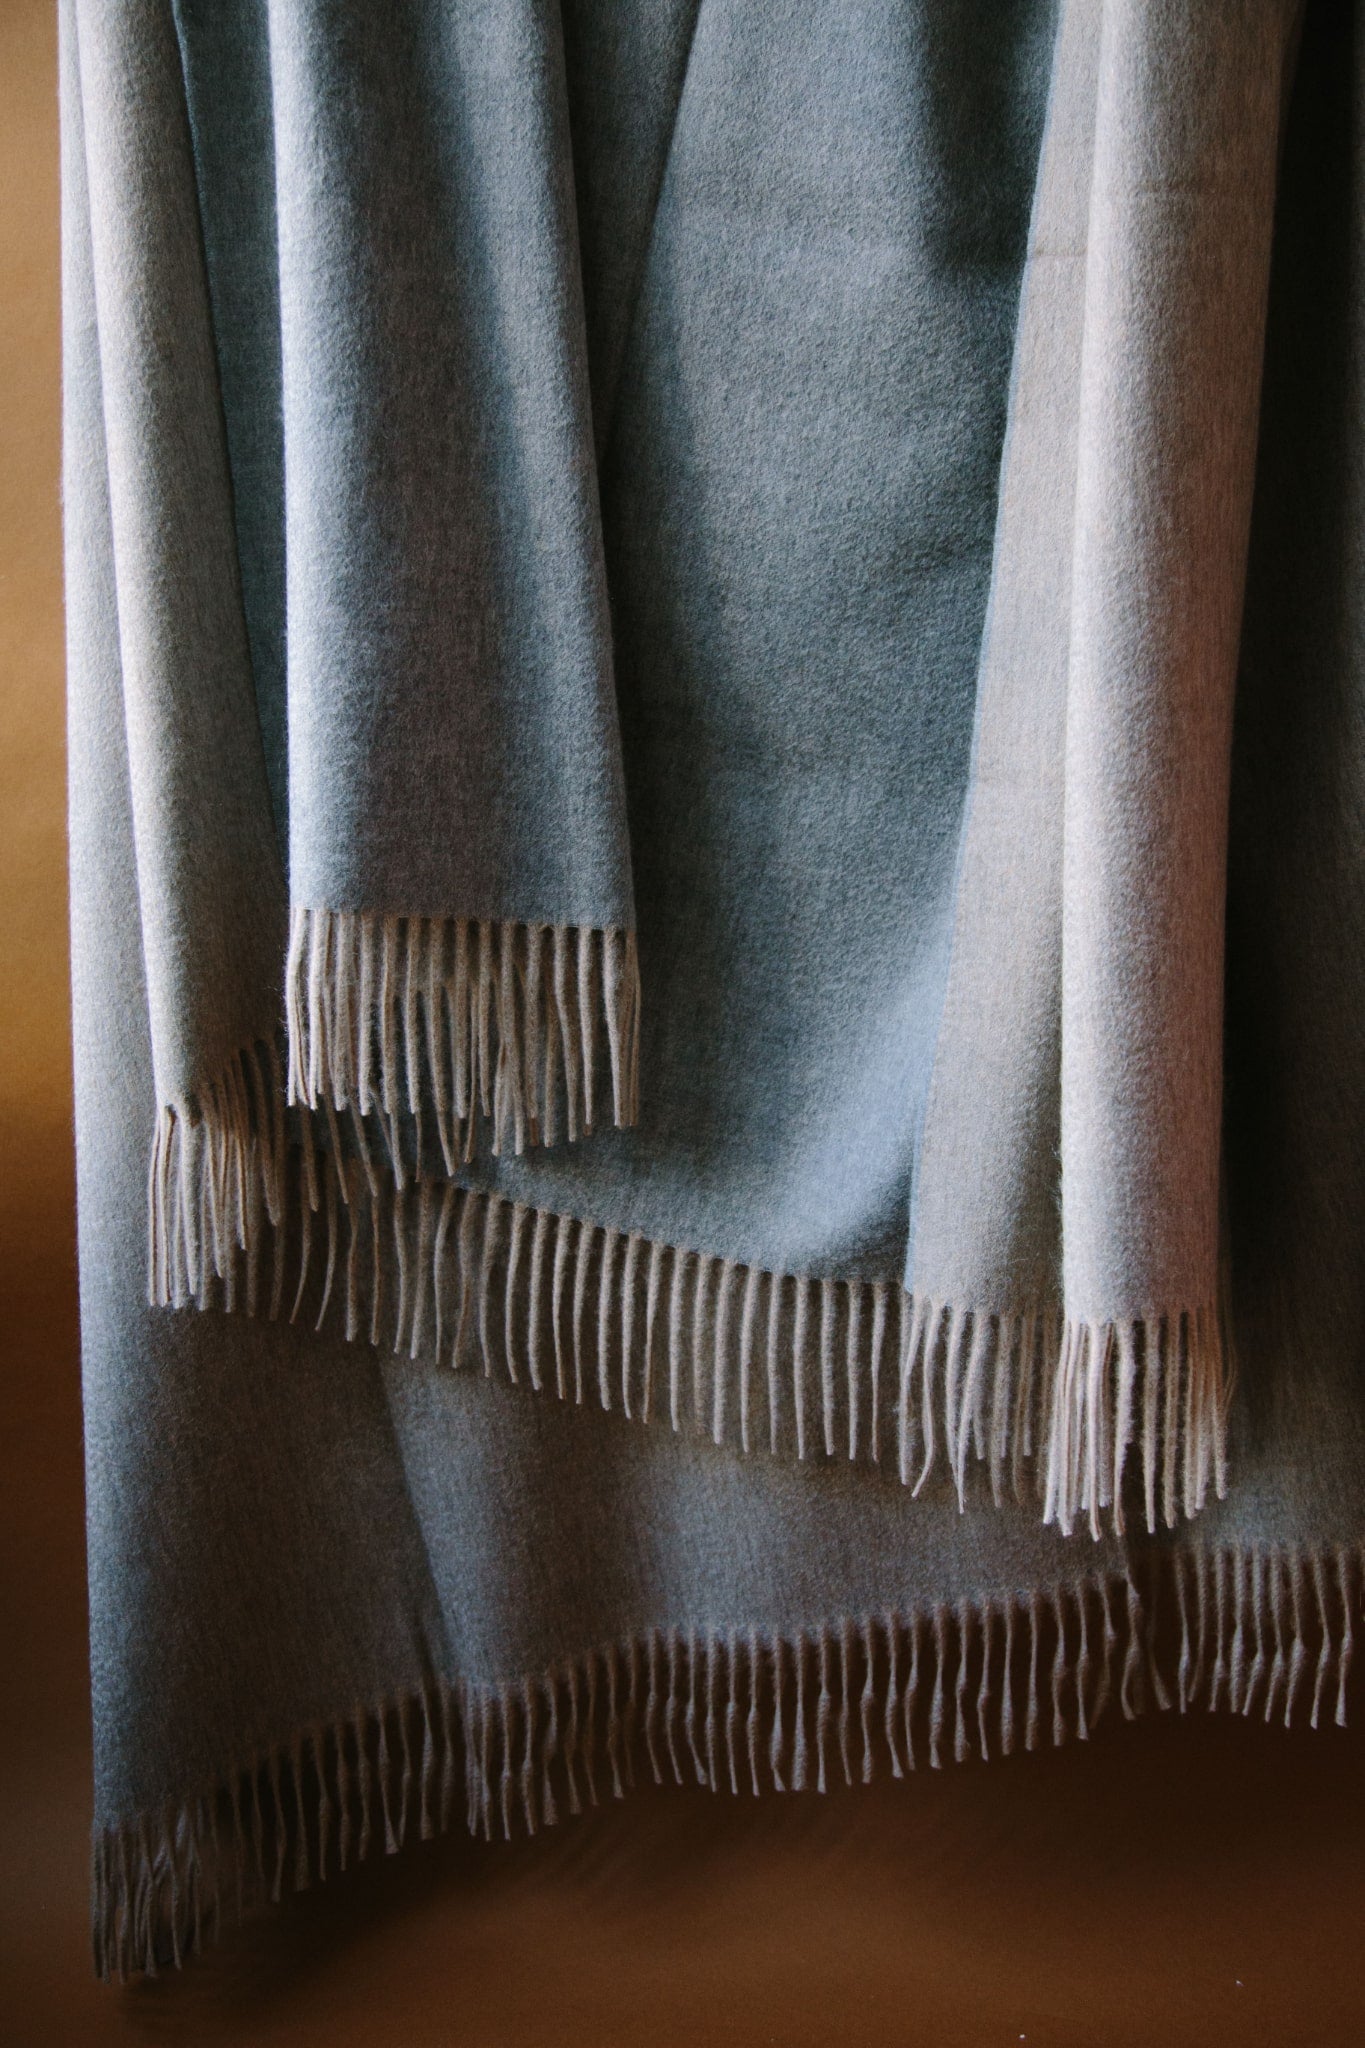 Large cashmere throw. Two sided reversible colour; grey and pale beige. Draped against a brown background with natural light.